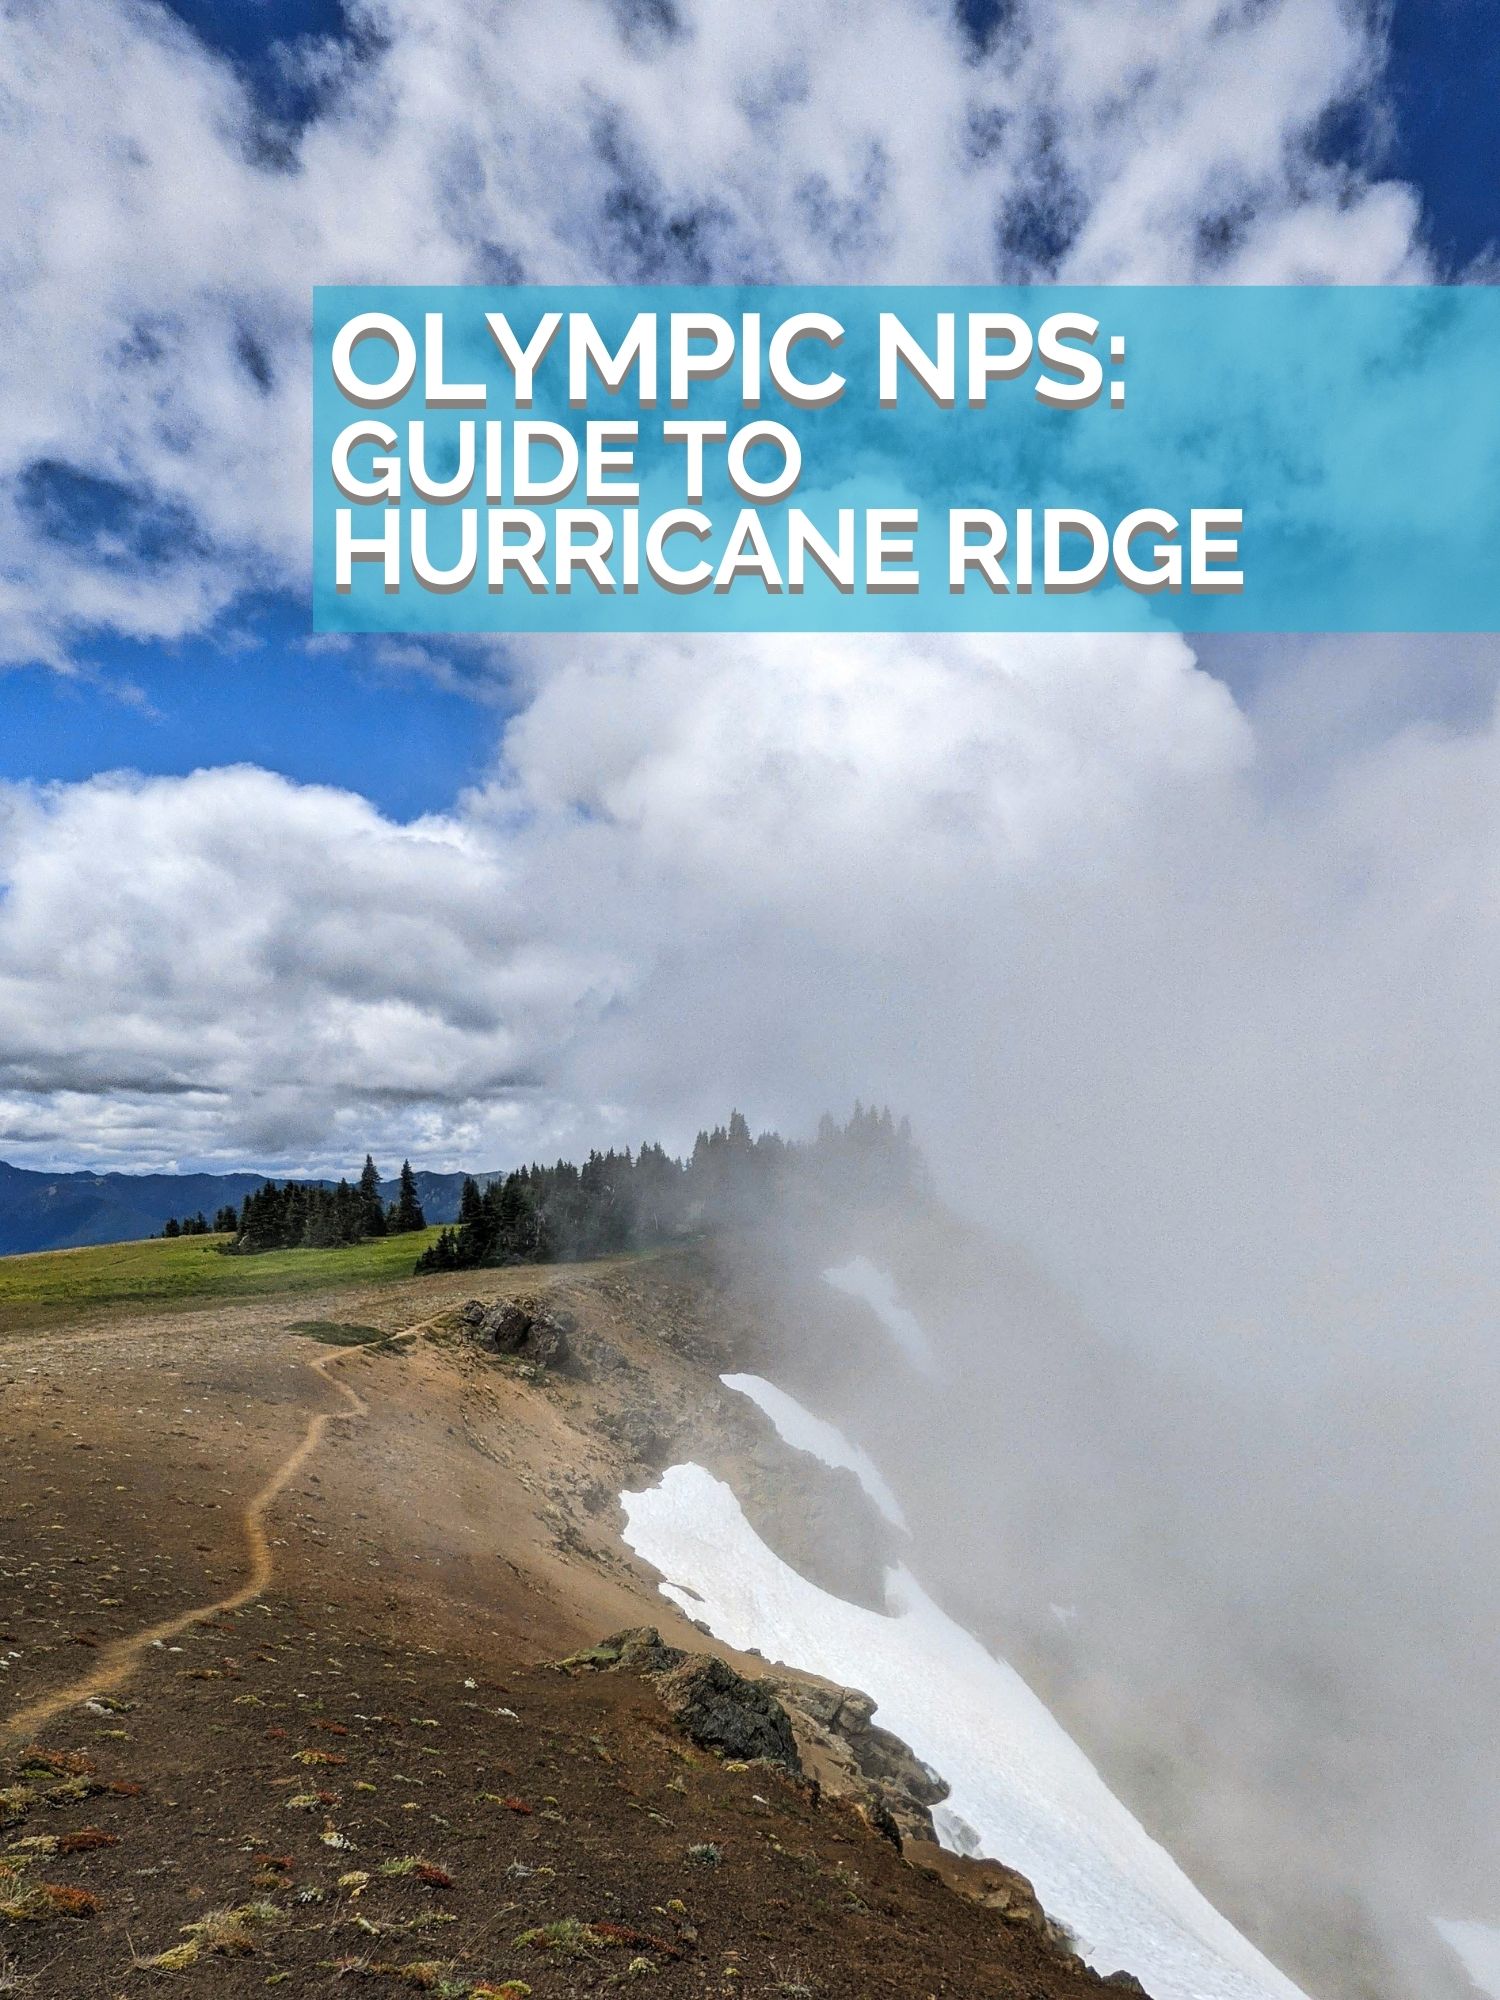 Hiking at Hurricane Ridge is one of the best day trips to the Olympic Peninsula. We've rated the trails rated from easiest to most difficult and included tips for visiting Hurricane Ridge any time of year.